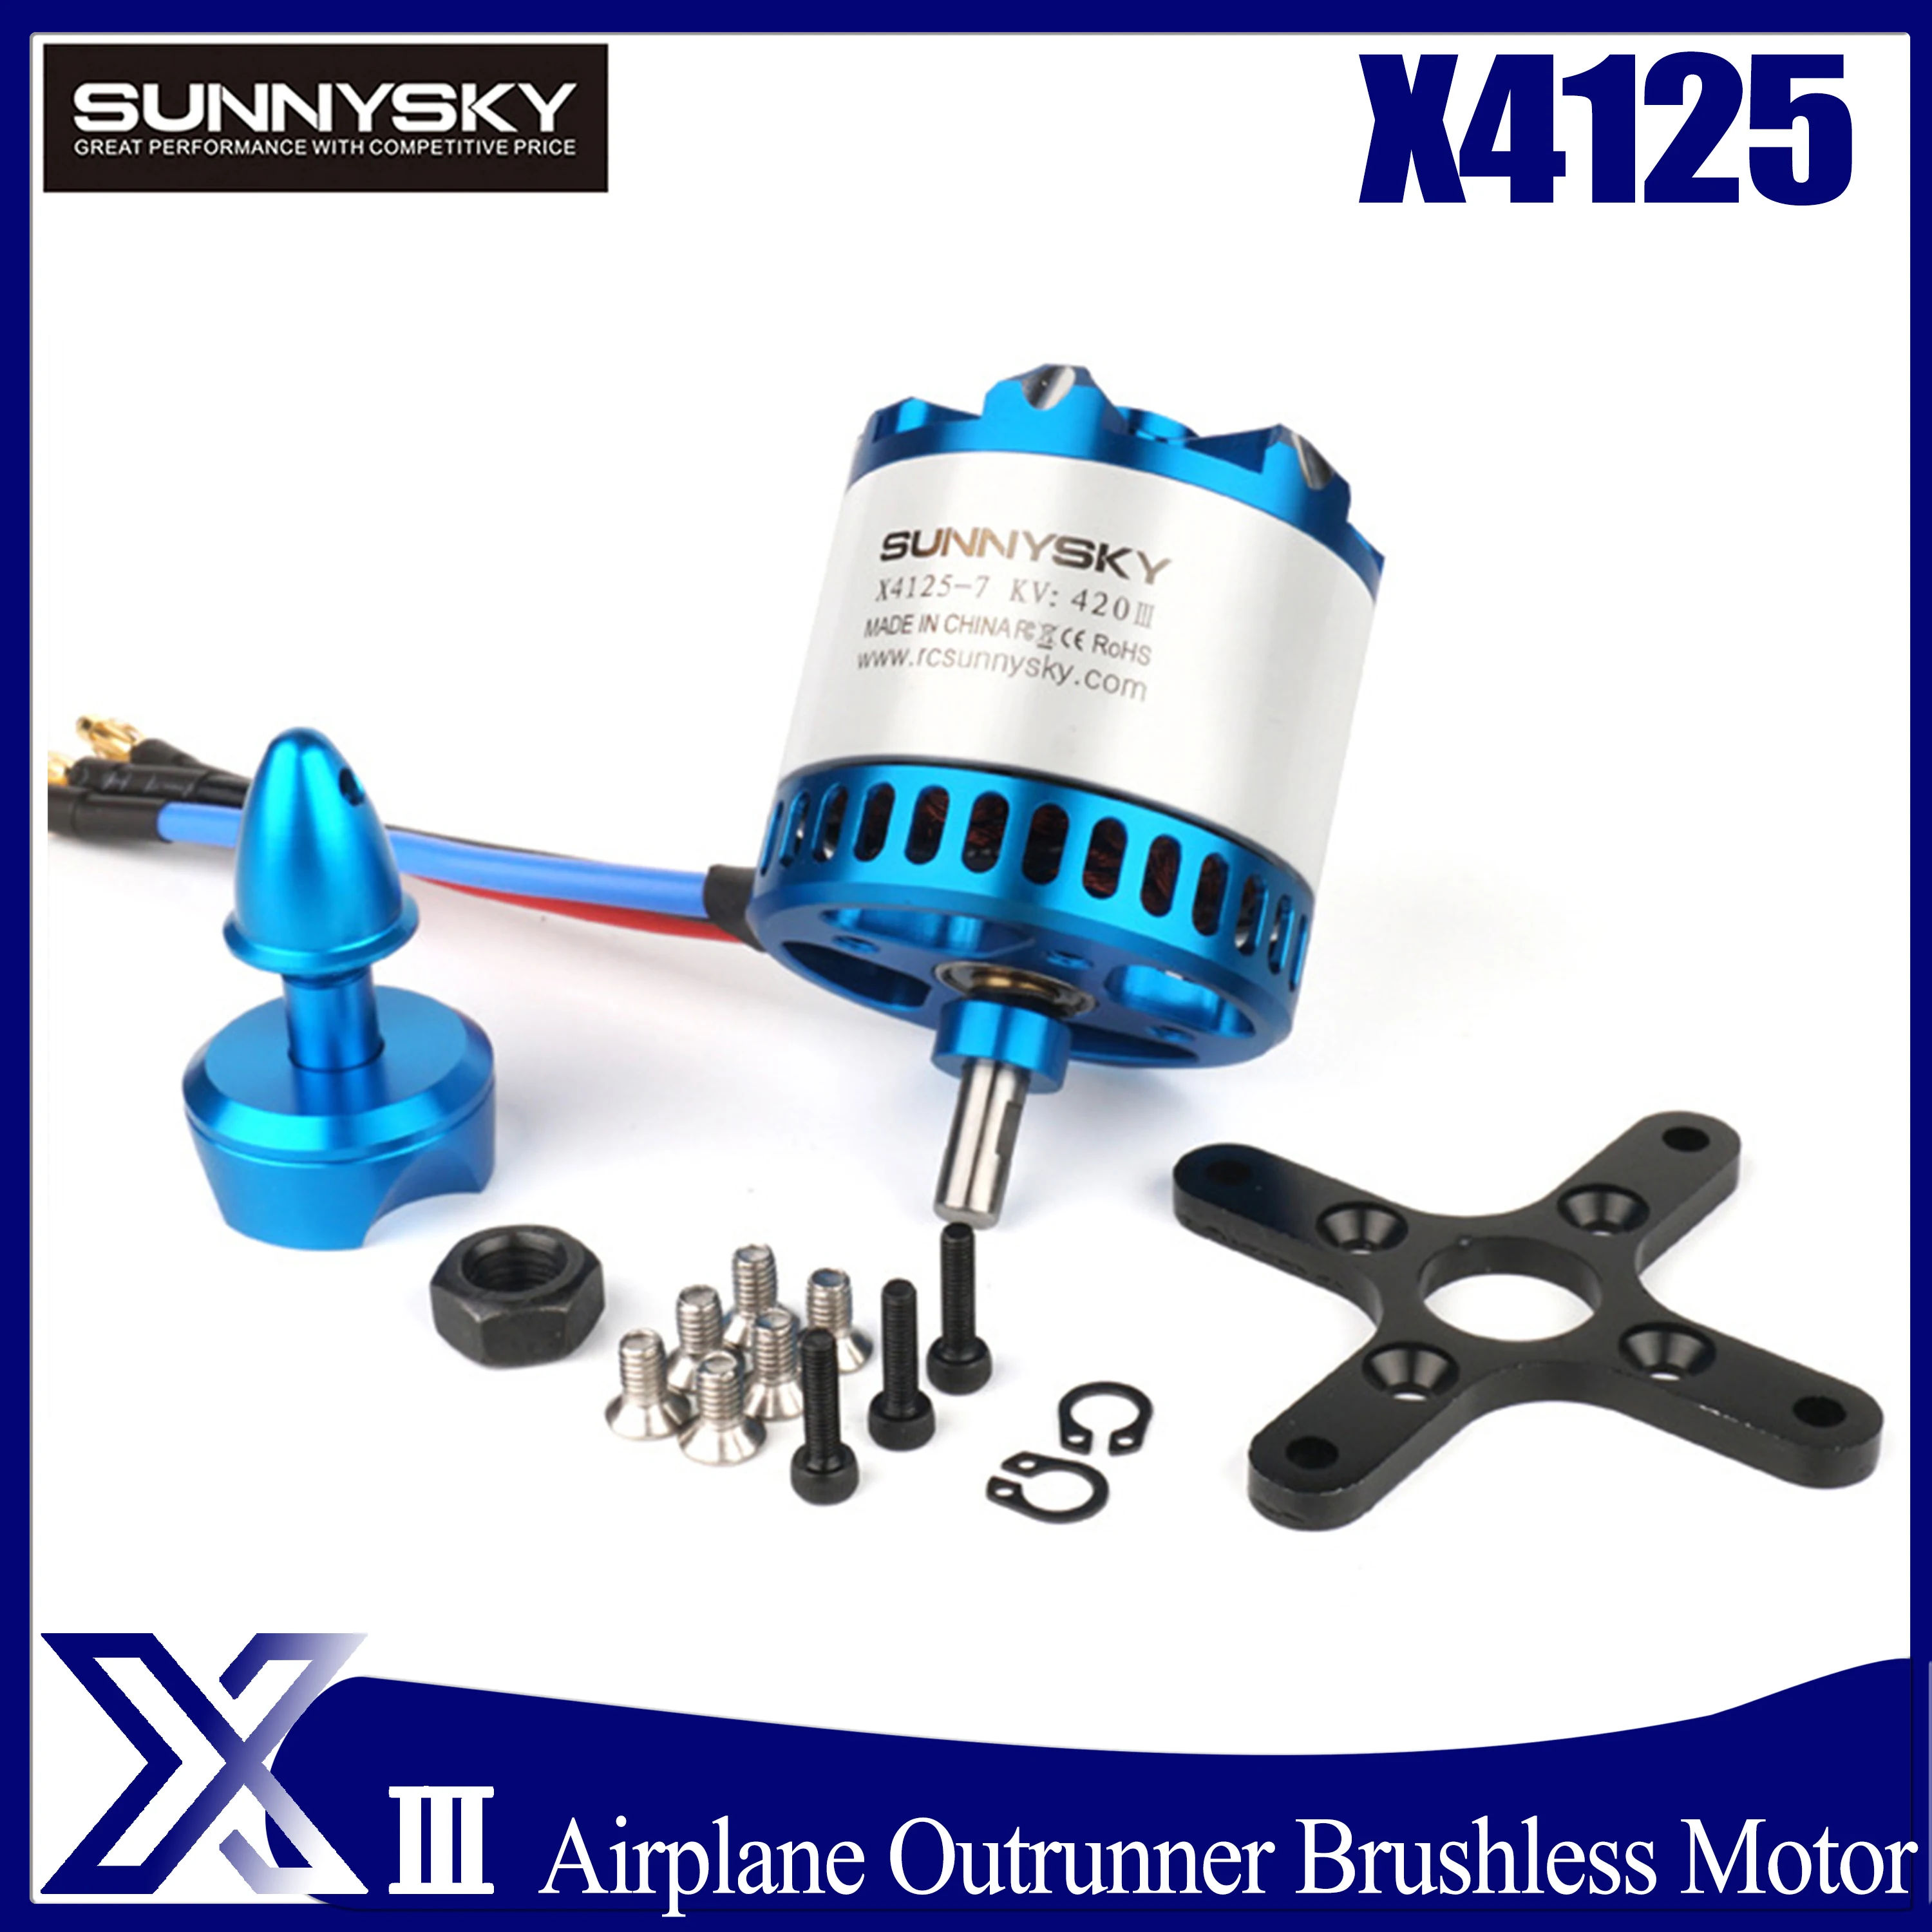 

Sunnysky X4125 III 4125 70E Fixed-wing V3 Series Outrunner Brushless Motor for Quadcopter Helicopter 3D Glider Drone Airplane